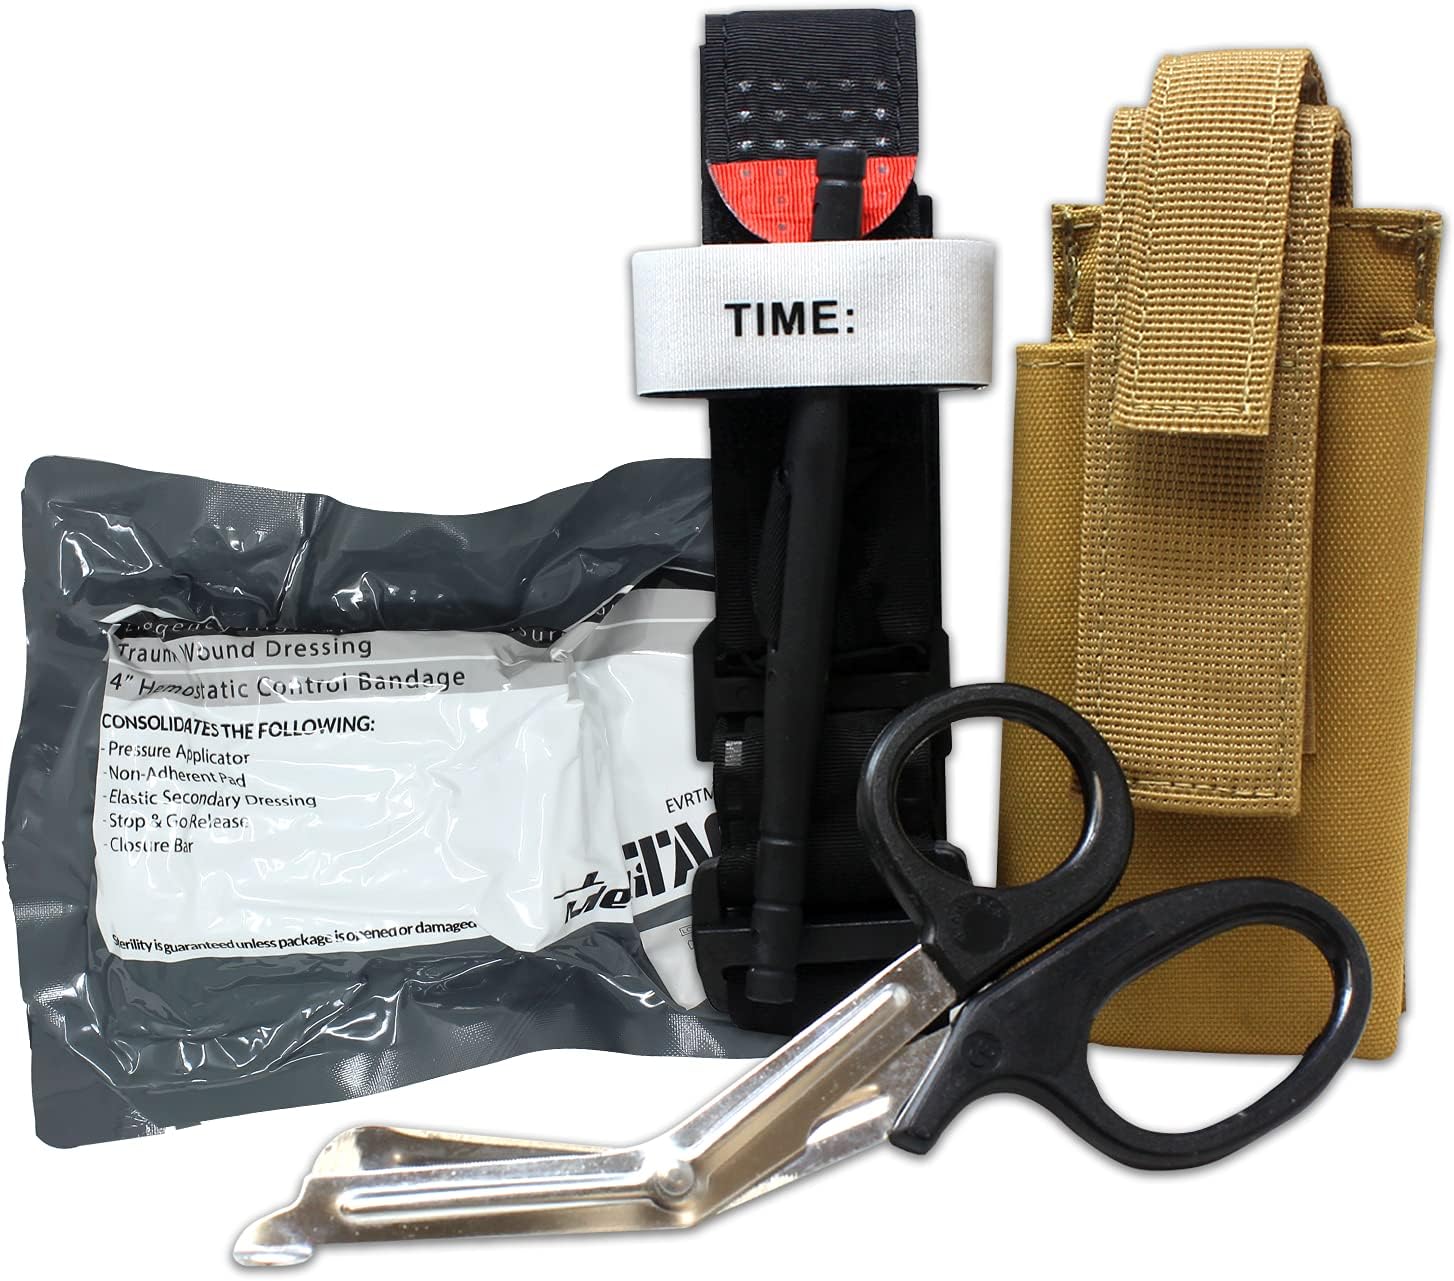 MediTac Gen 1 Combo IFAK Components - Feat. Tourniquet and holder, Emergency Bleeding Control Bandage and Stainless Steel EMS Shears